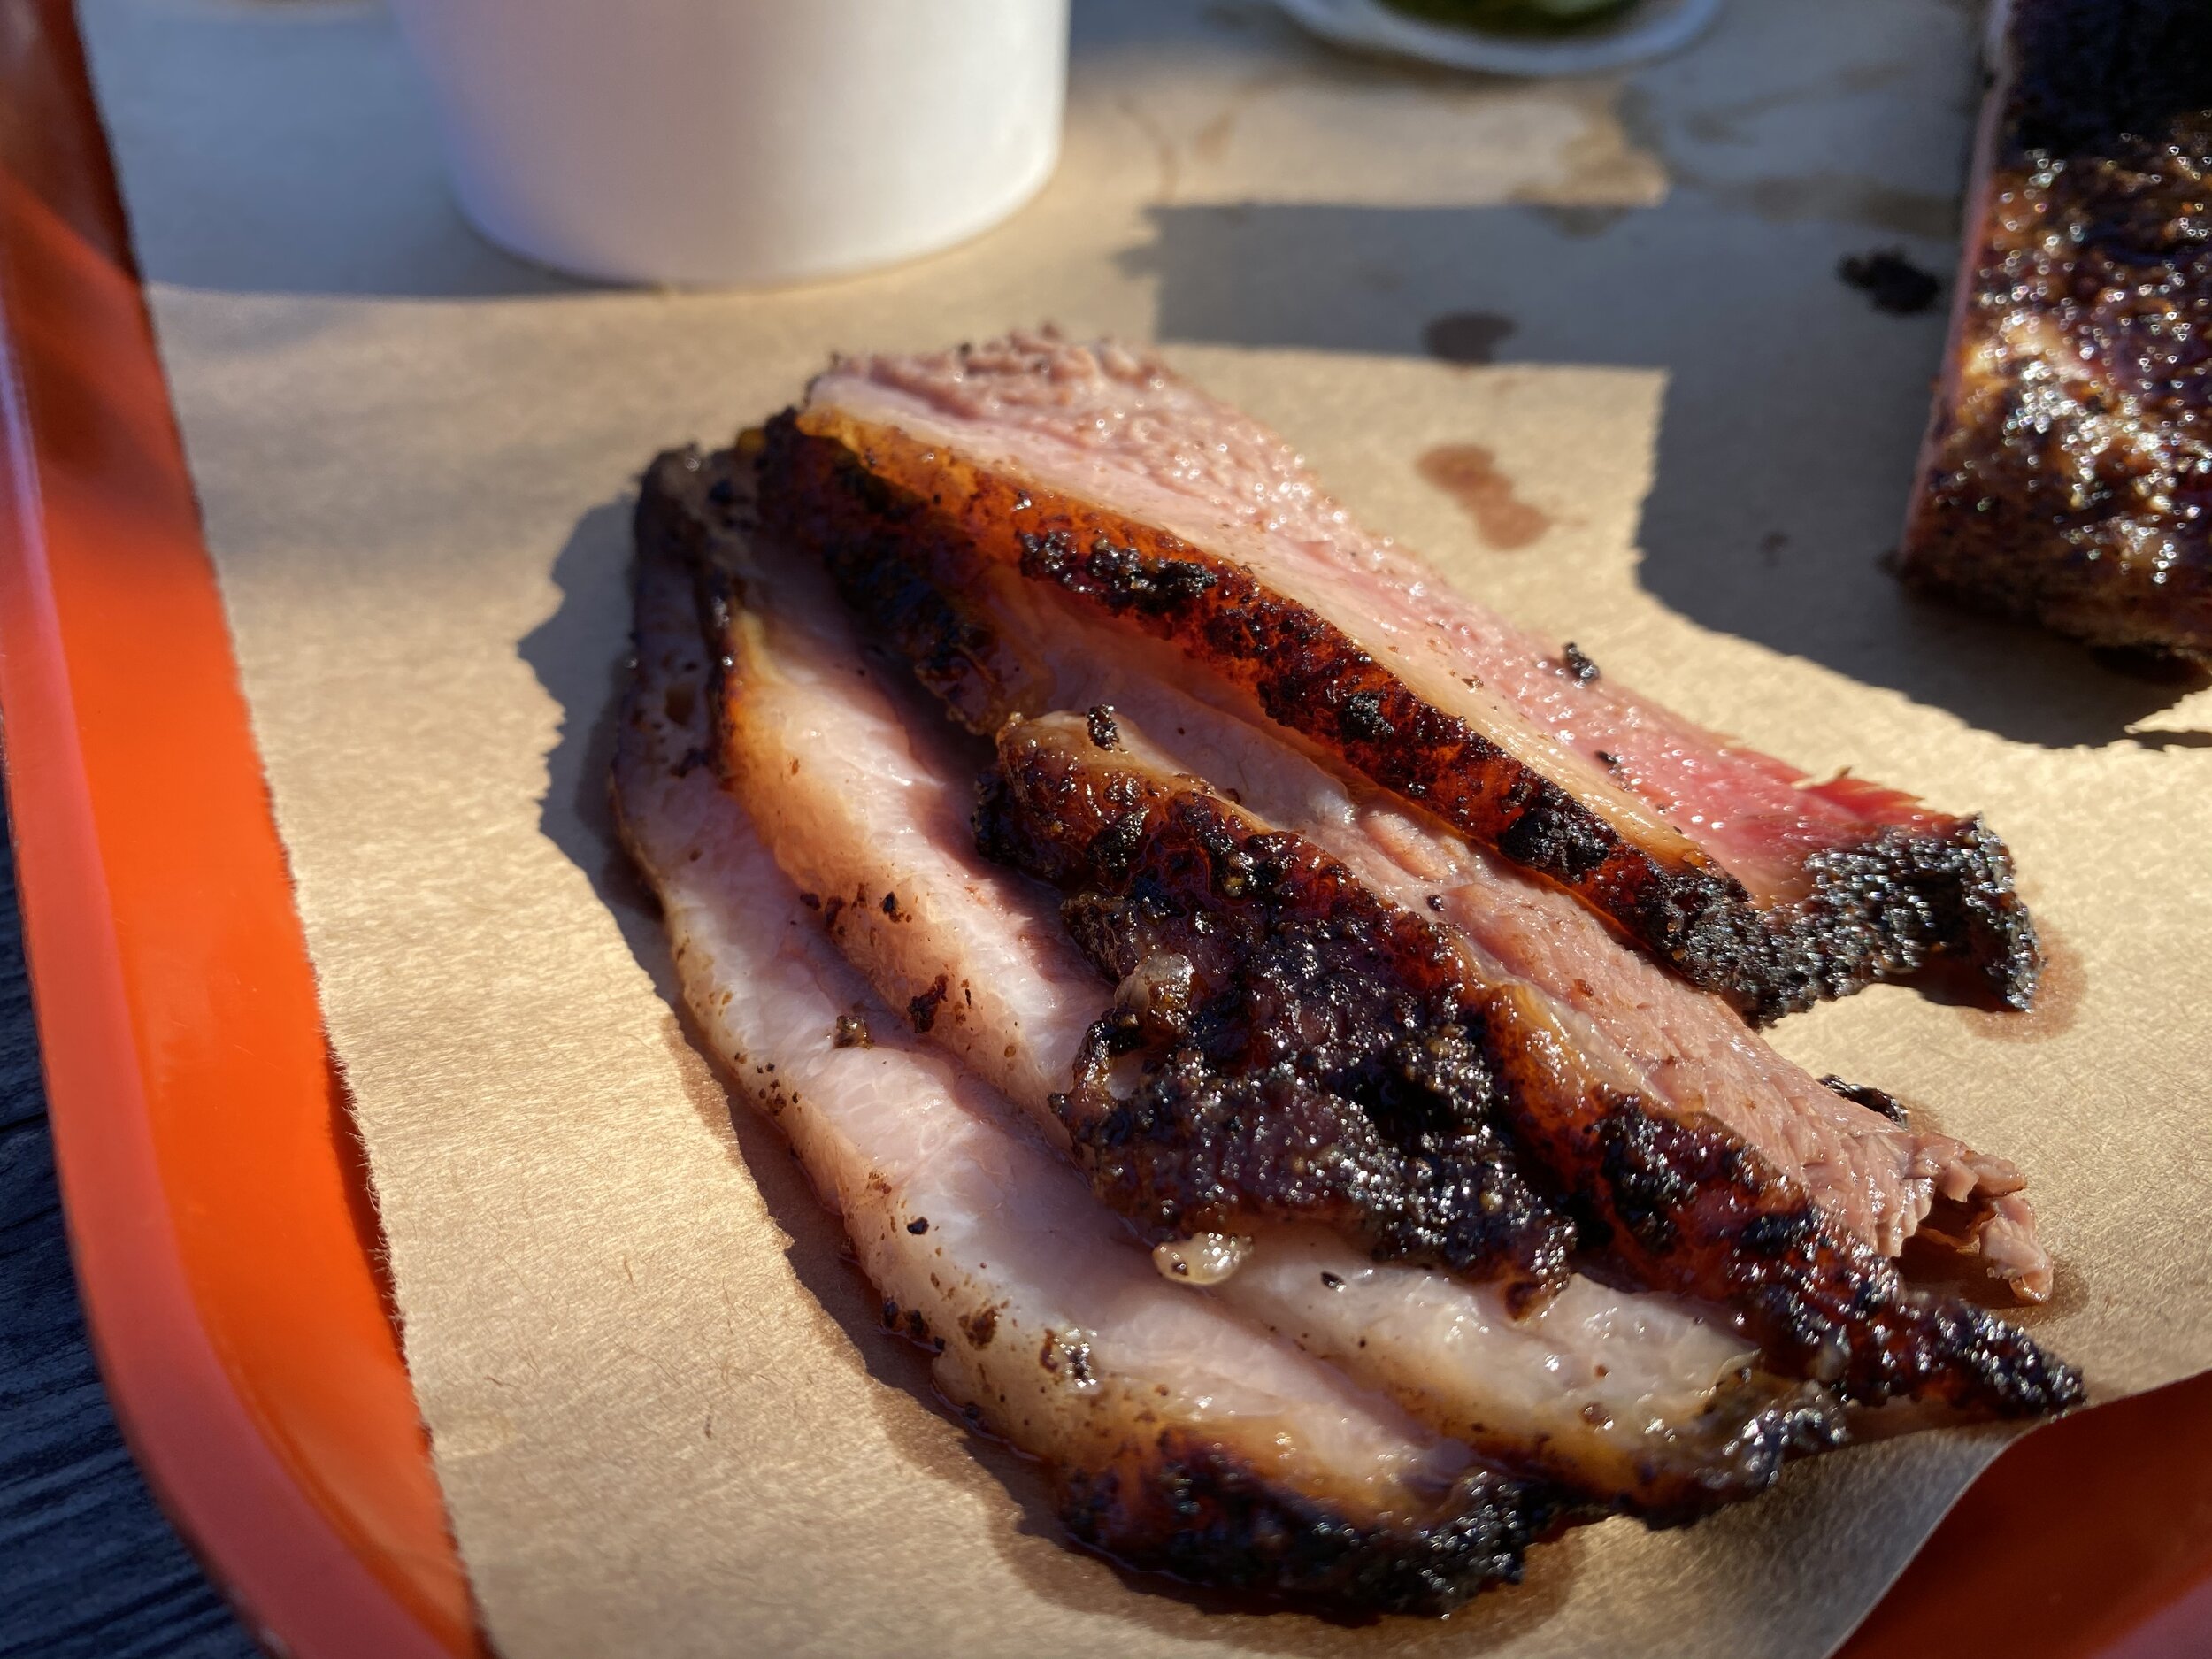 Brisket from The Bearded Pig